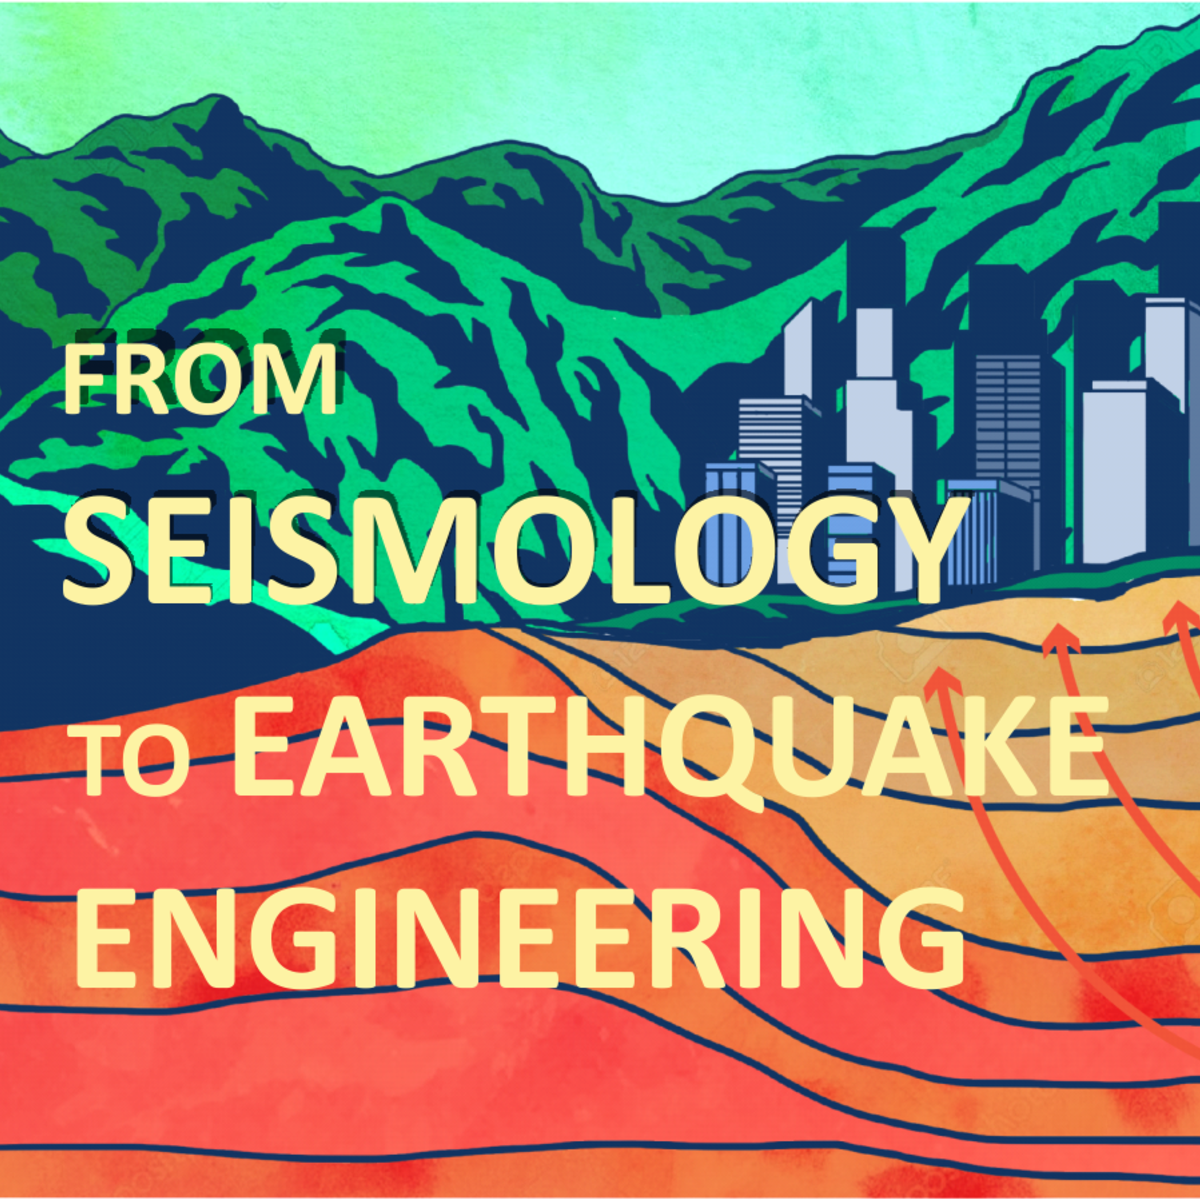 Earthquake Engineering Review Workshop for Masters Students from